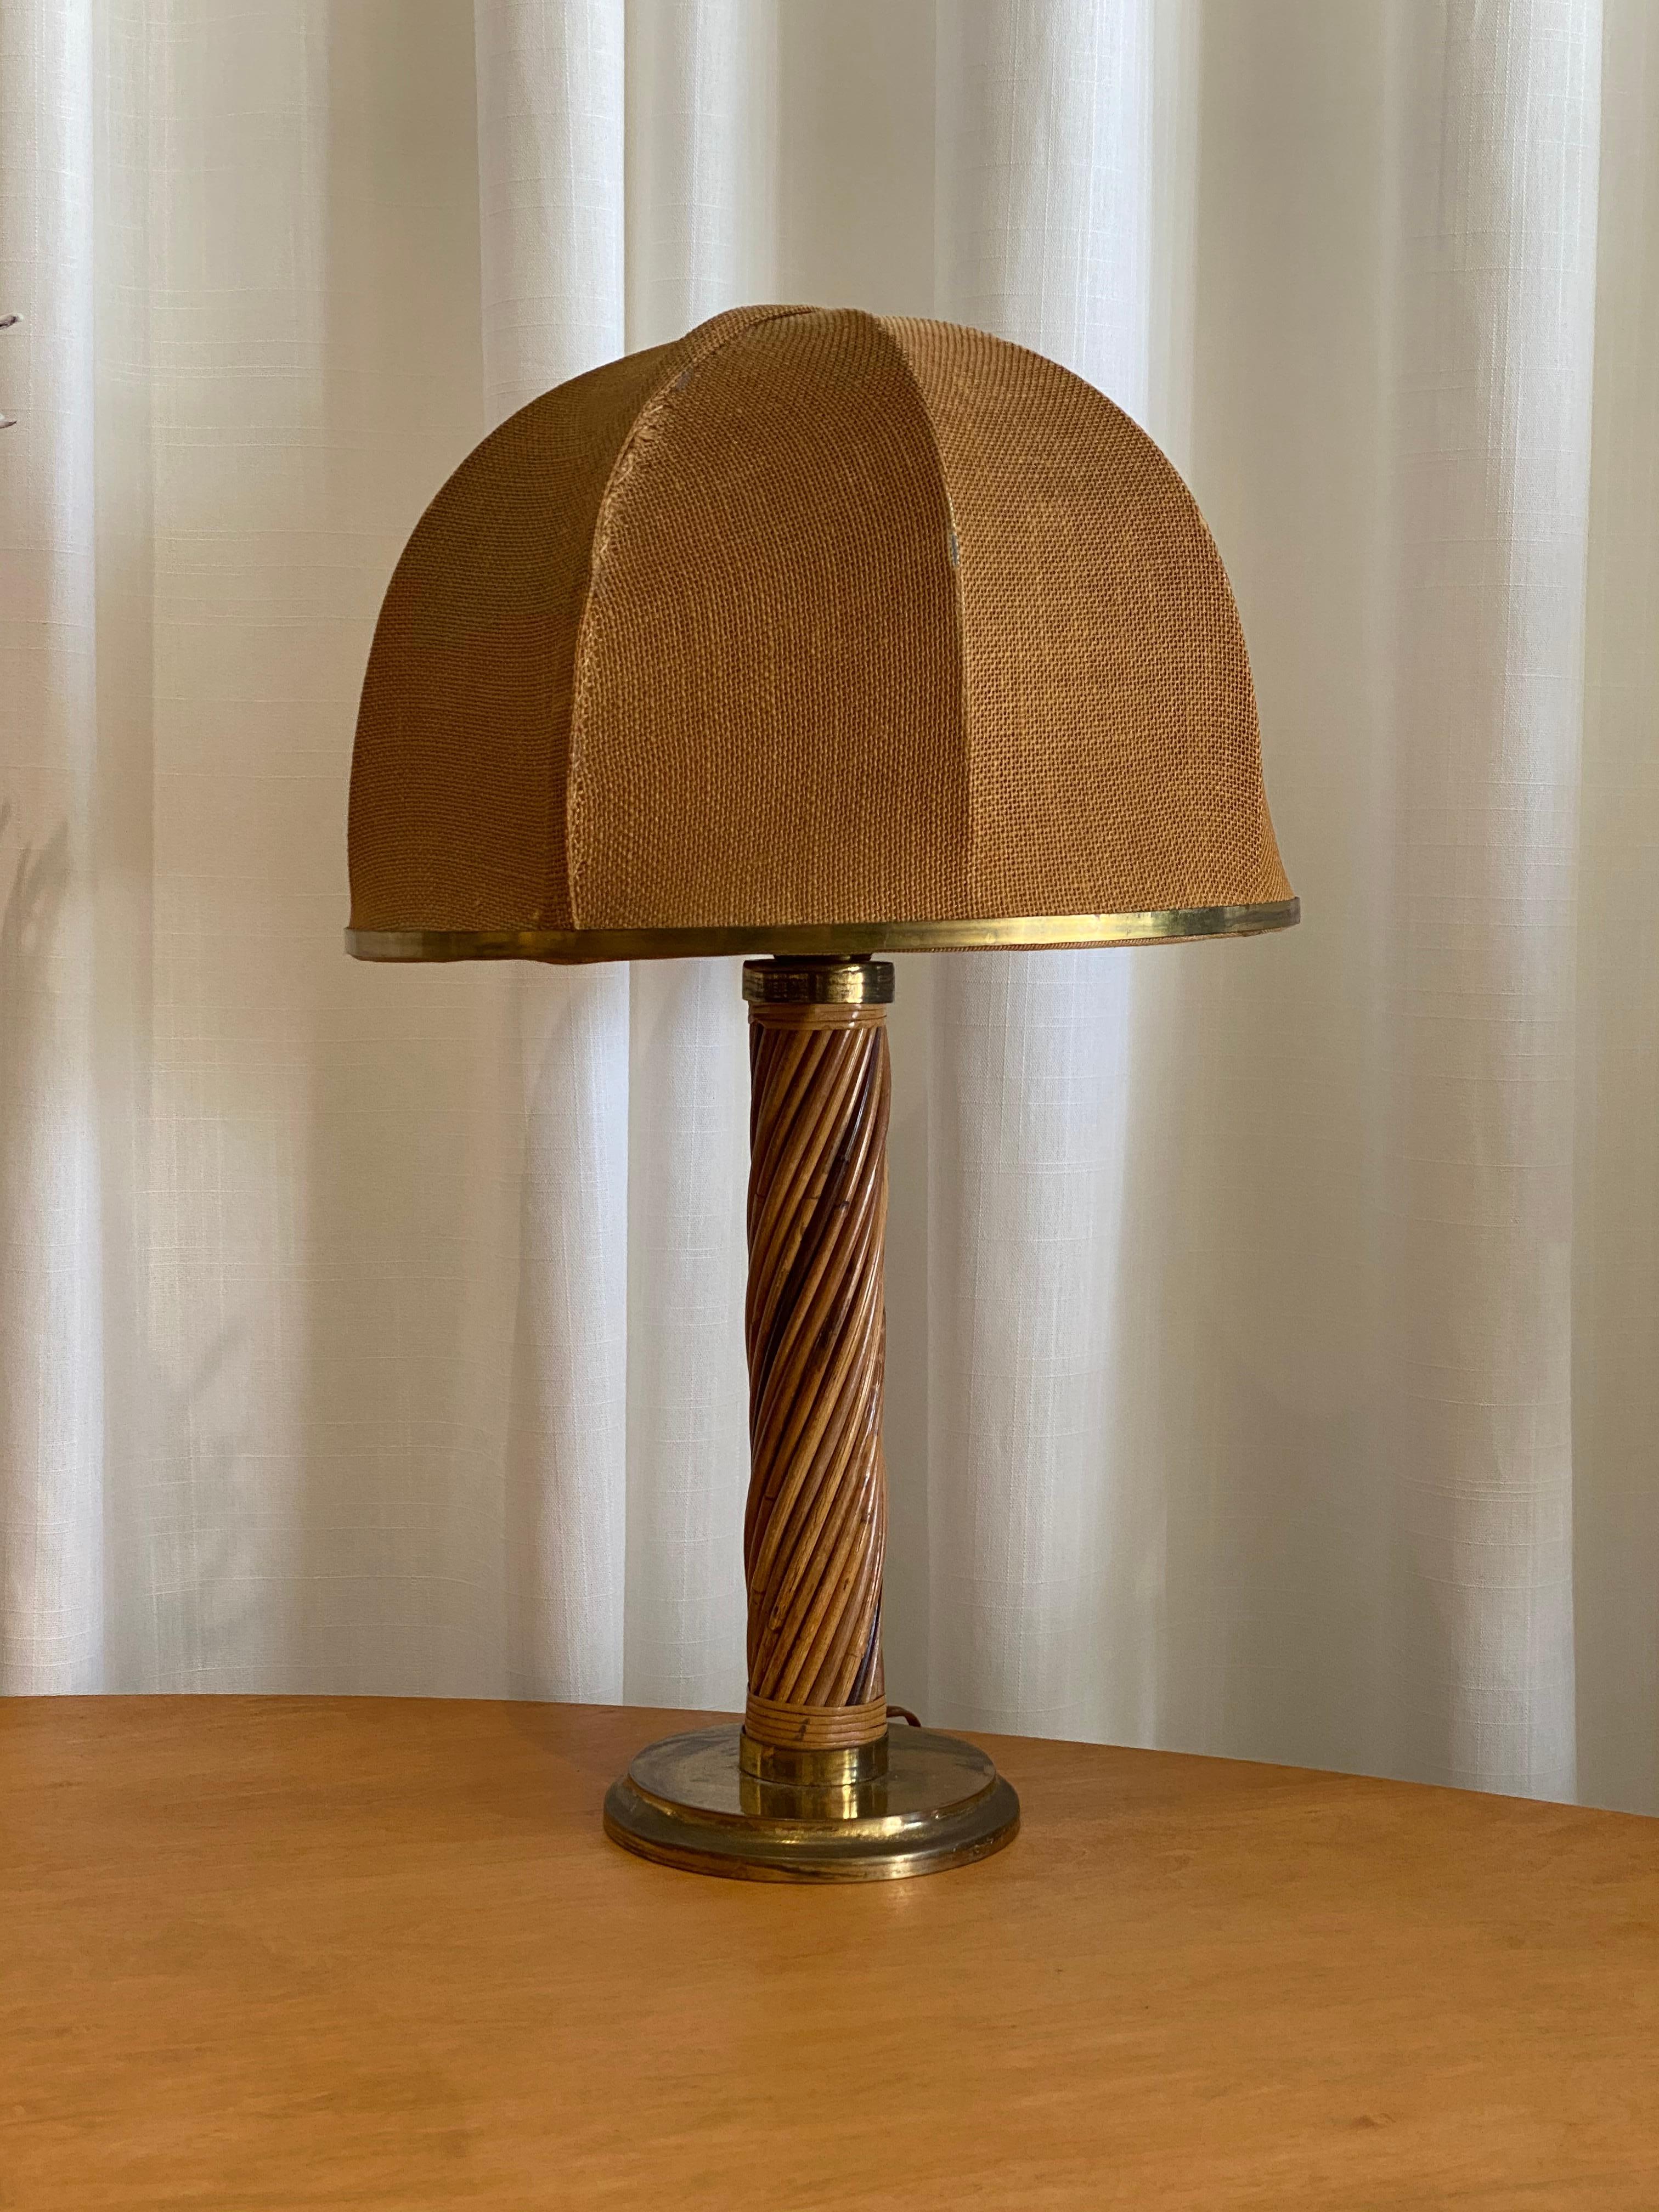 A sizable all original table lamp. By an unknown Italian designer. 

Other designers of the period include Gabriella Crespi, Angelo Lelii, Max Ingrand, Fontana Arte, and Paavo Tynell.